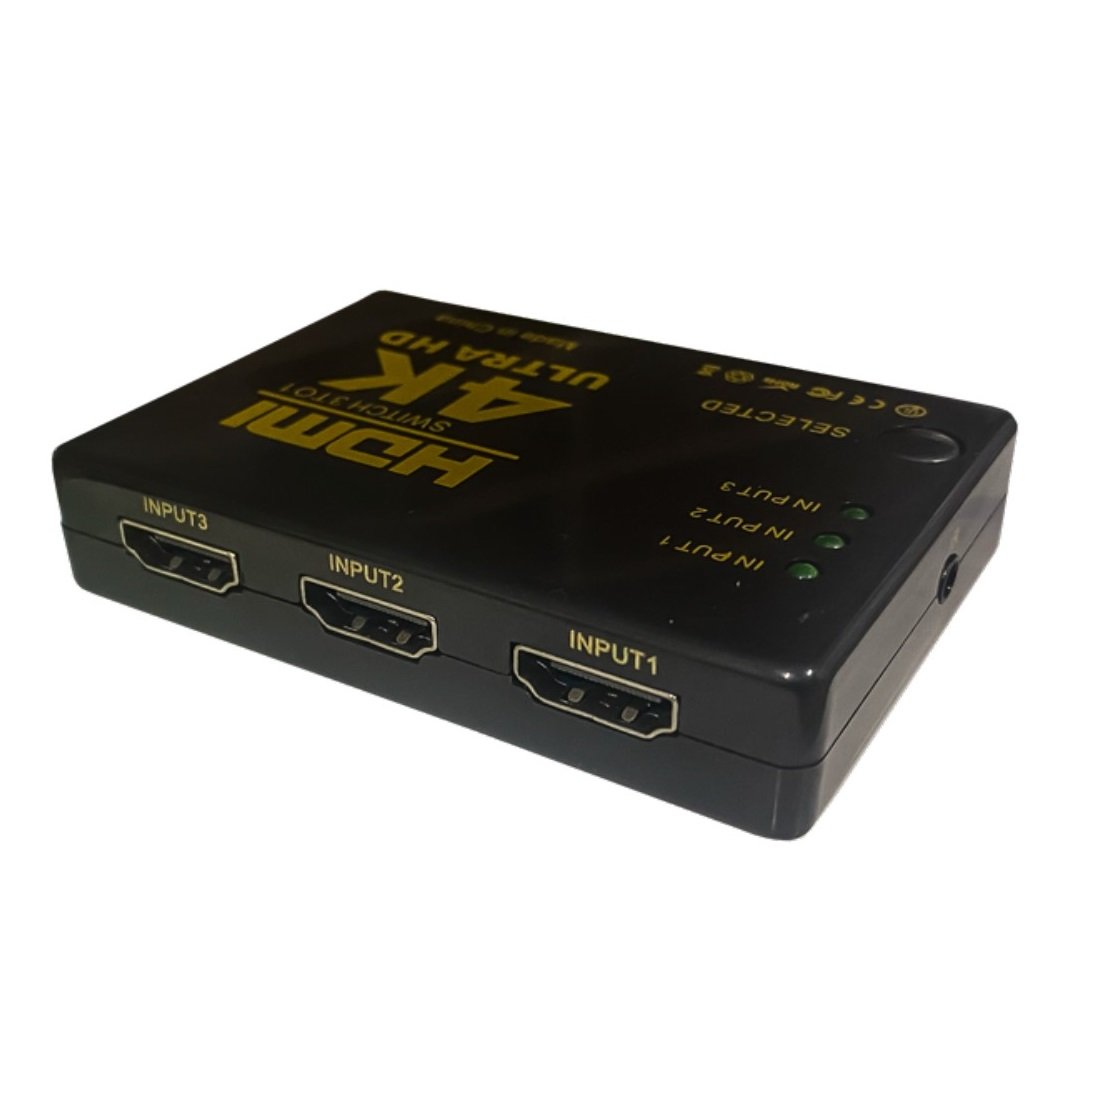 Zankap 3-Way HDMI Switch, 4K Video Support, 3 x HDMI In, 1 x HDMI Out